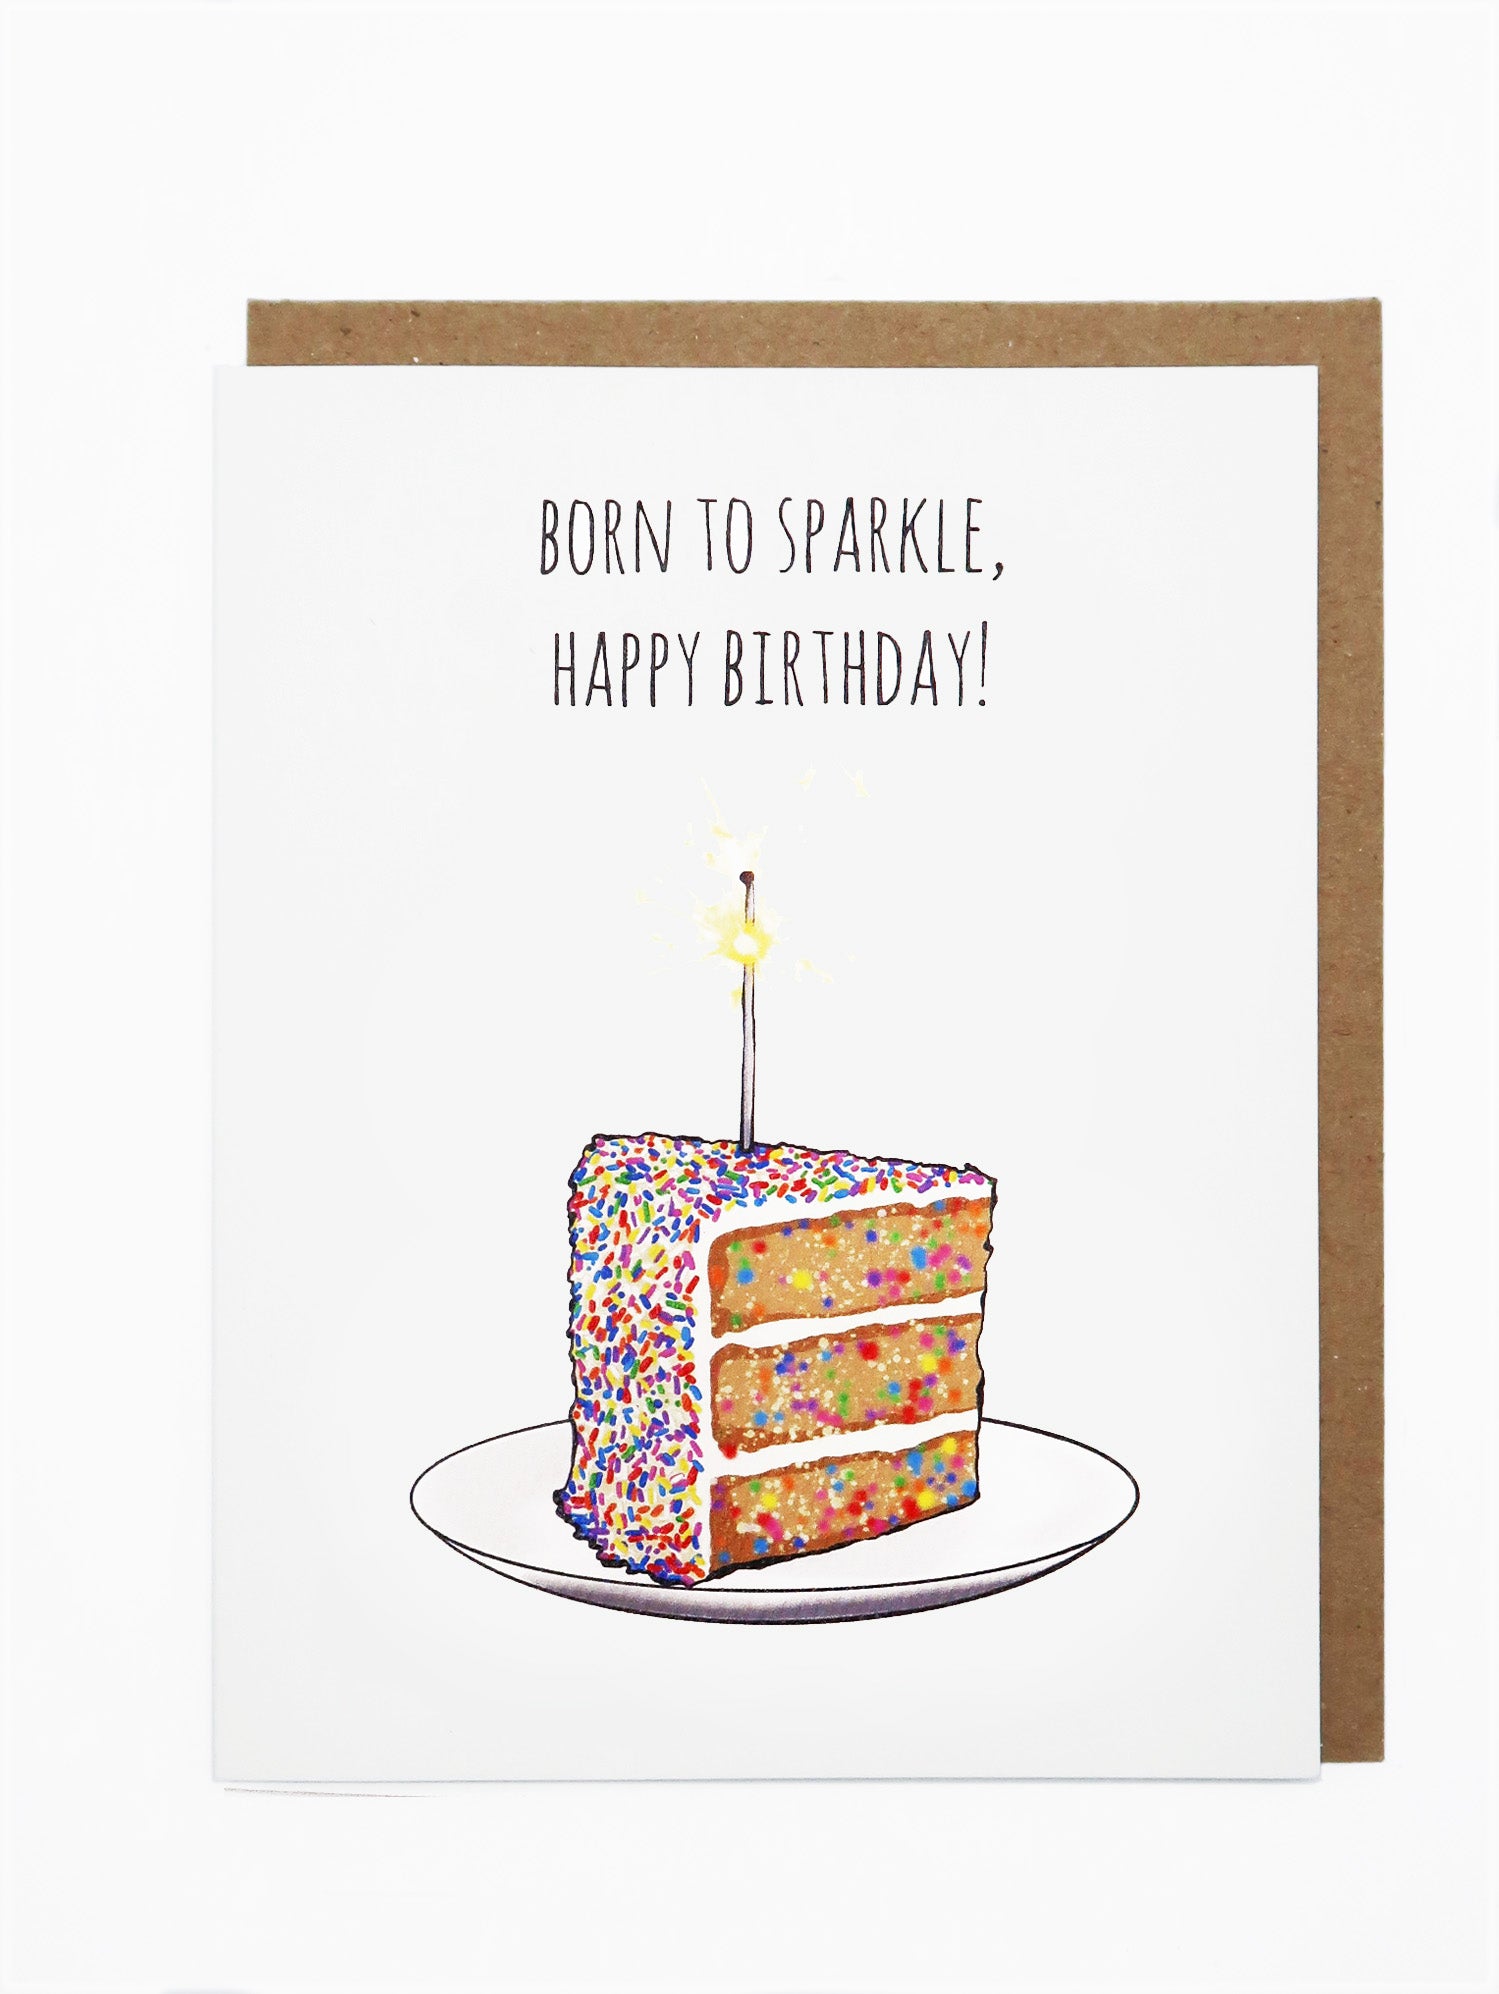 Birthday Cake Sparklers | A Sparkler for Cakes to Accompany Candles